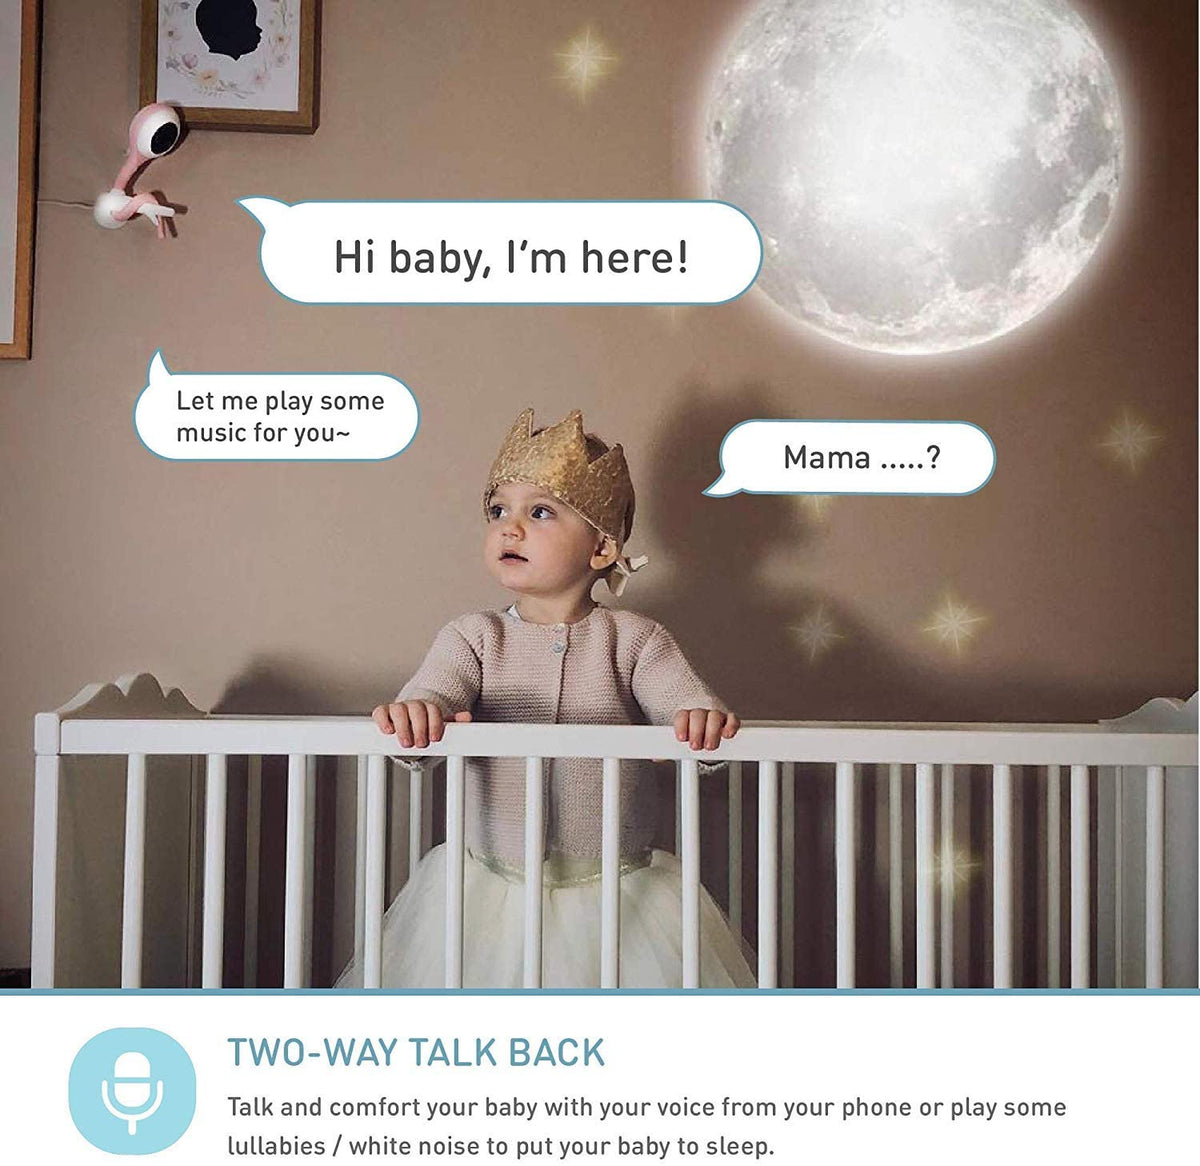 [OPEN BOX] LOLLIPOP HD WiFi Video Baby Monitor - Cotton Candy Pink